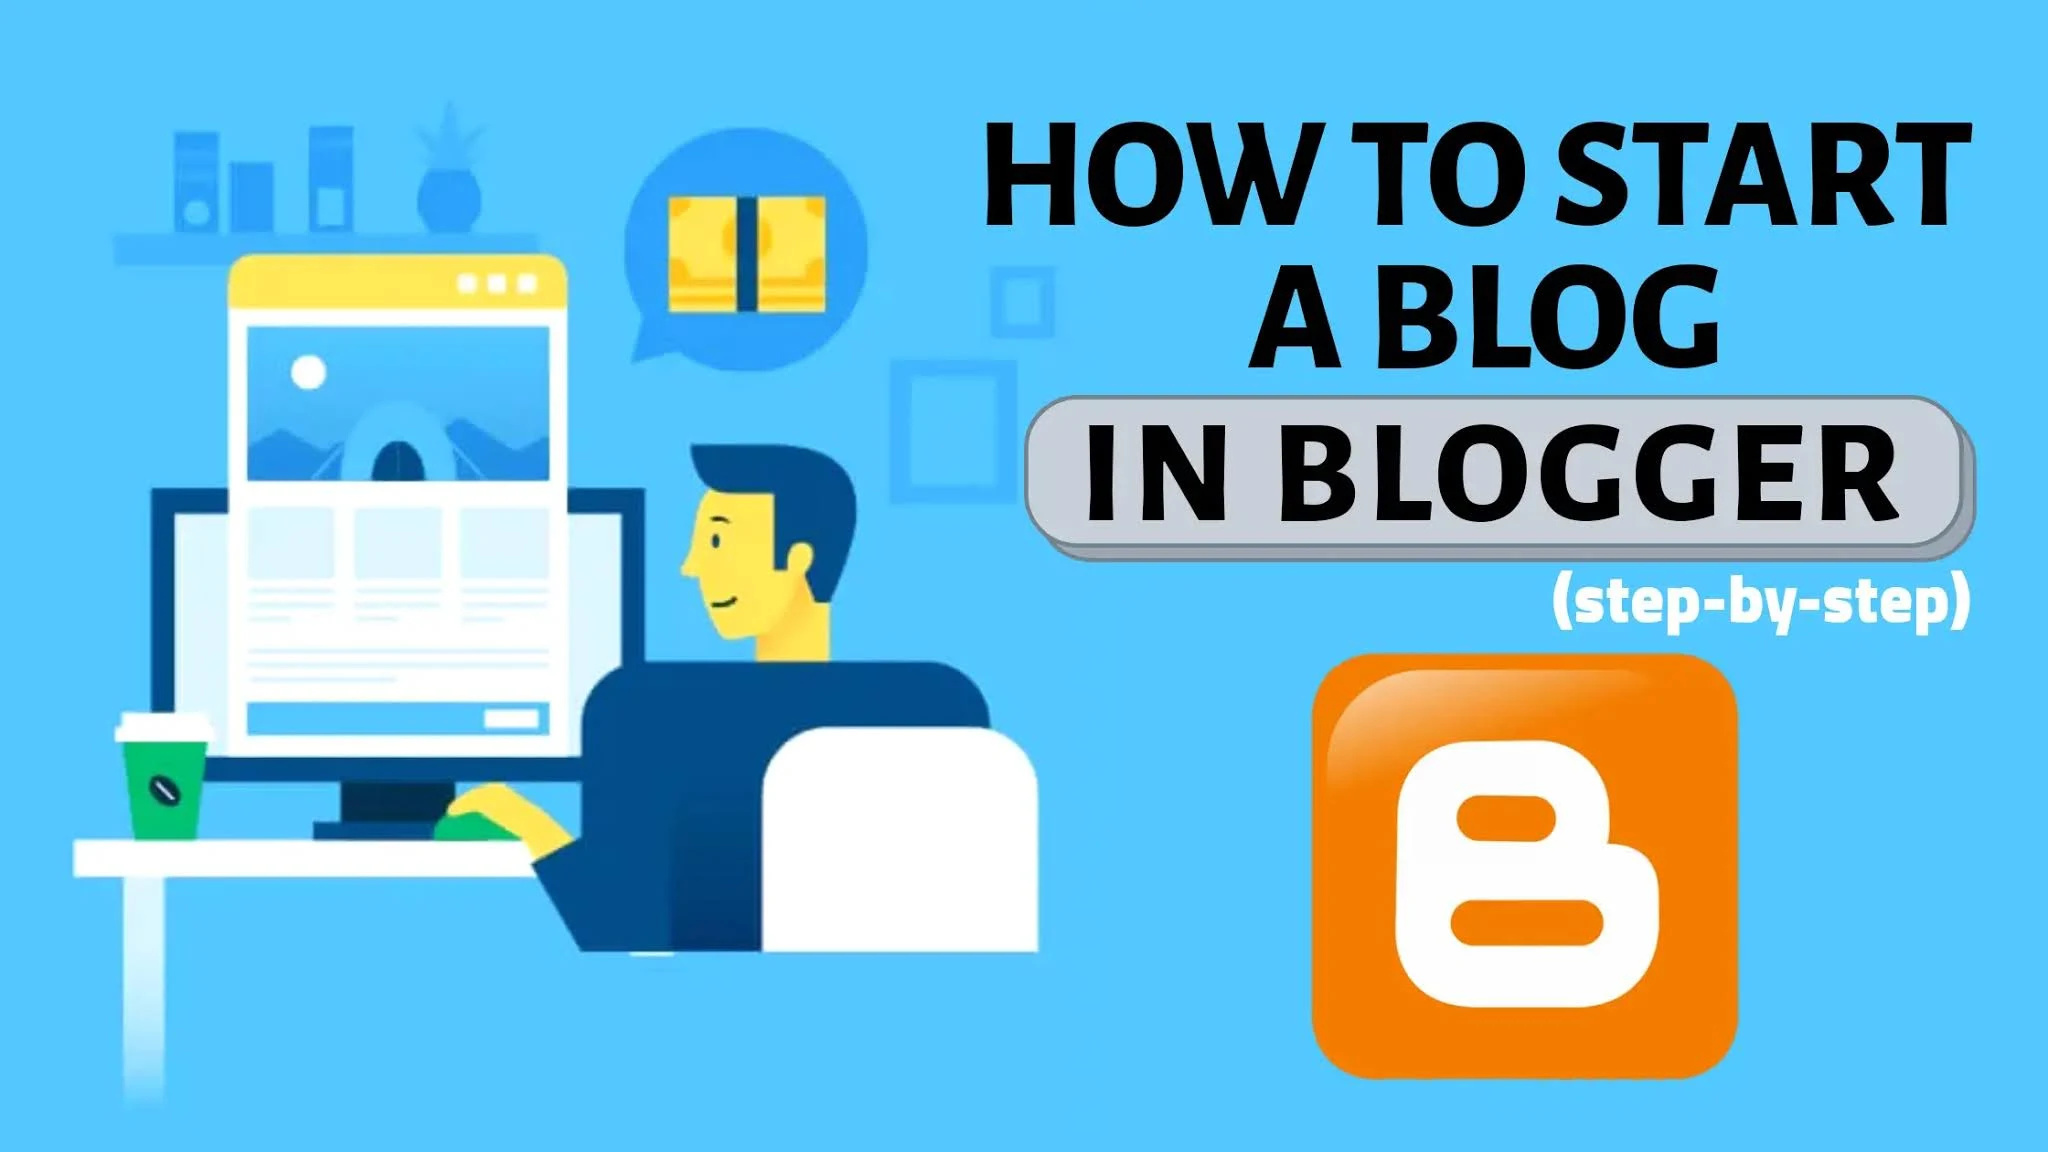 How to start a blog in blogger